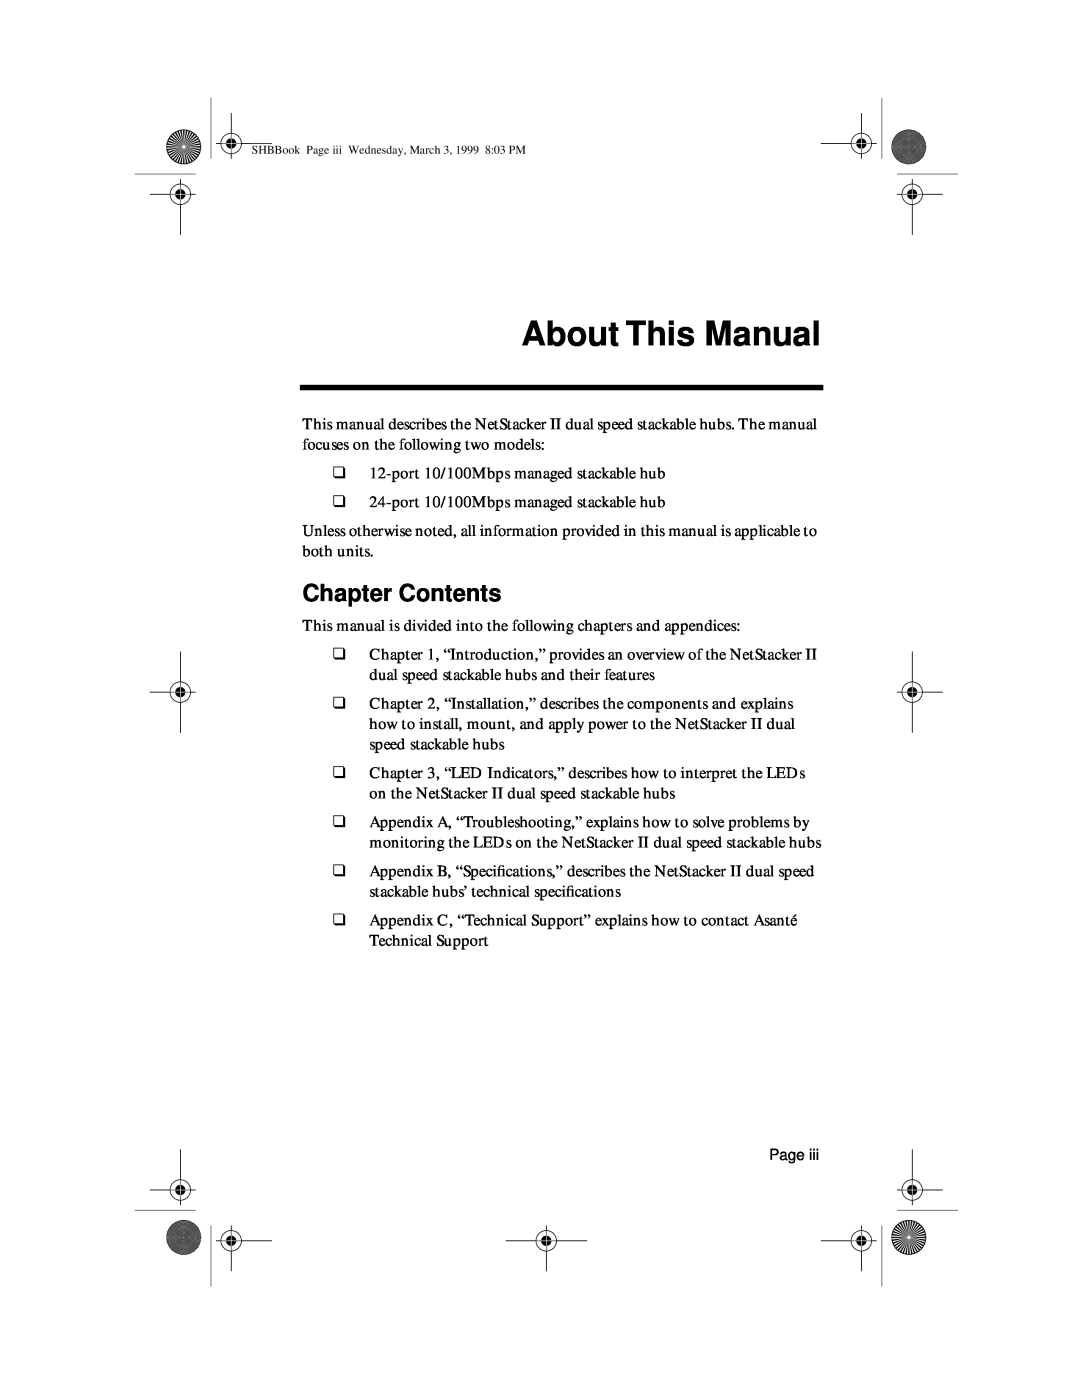 Asante Technologies II user manual About This Manual, Chapter Contents 